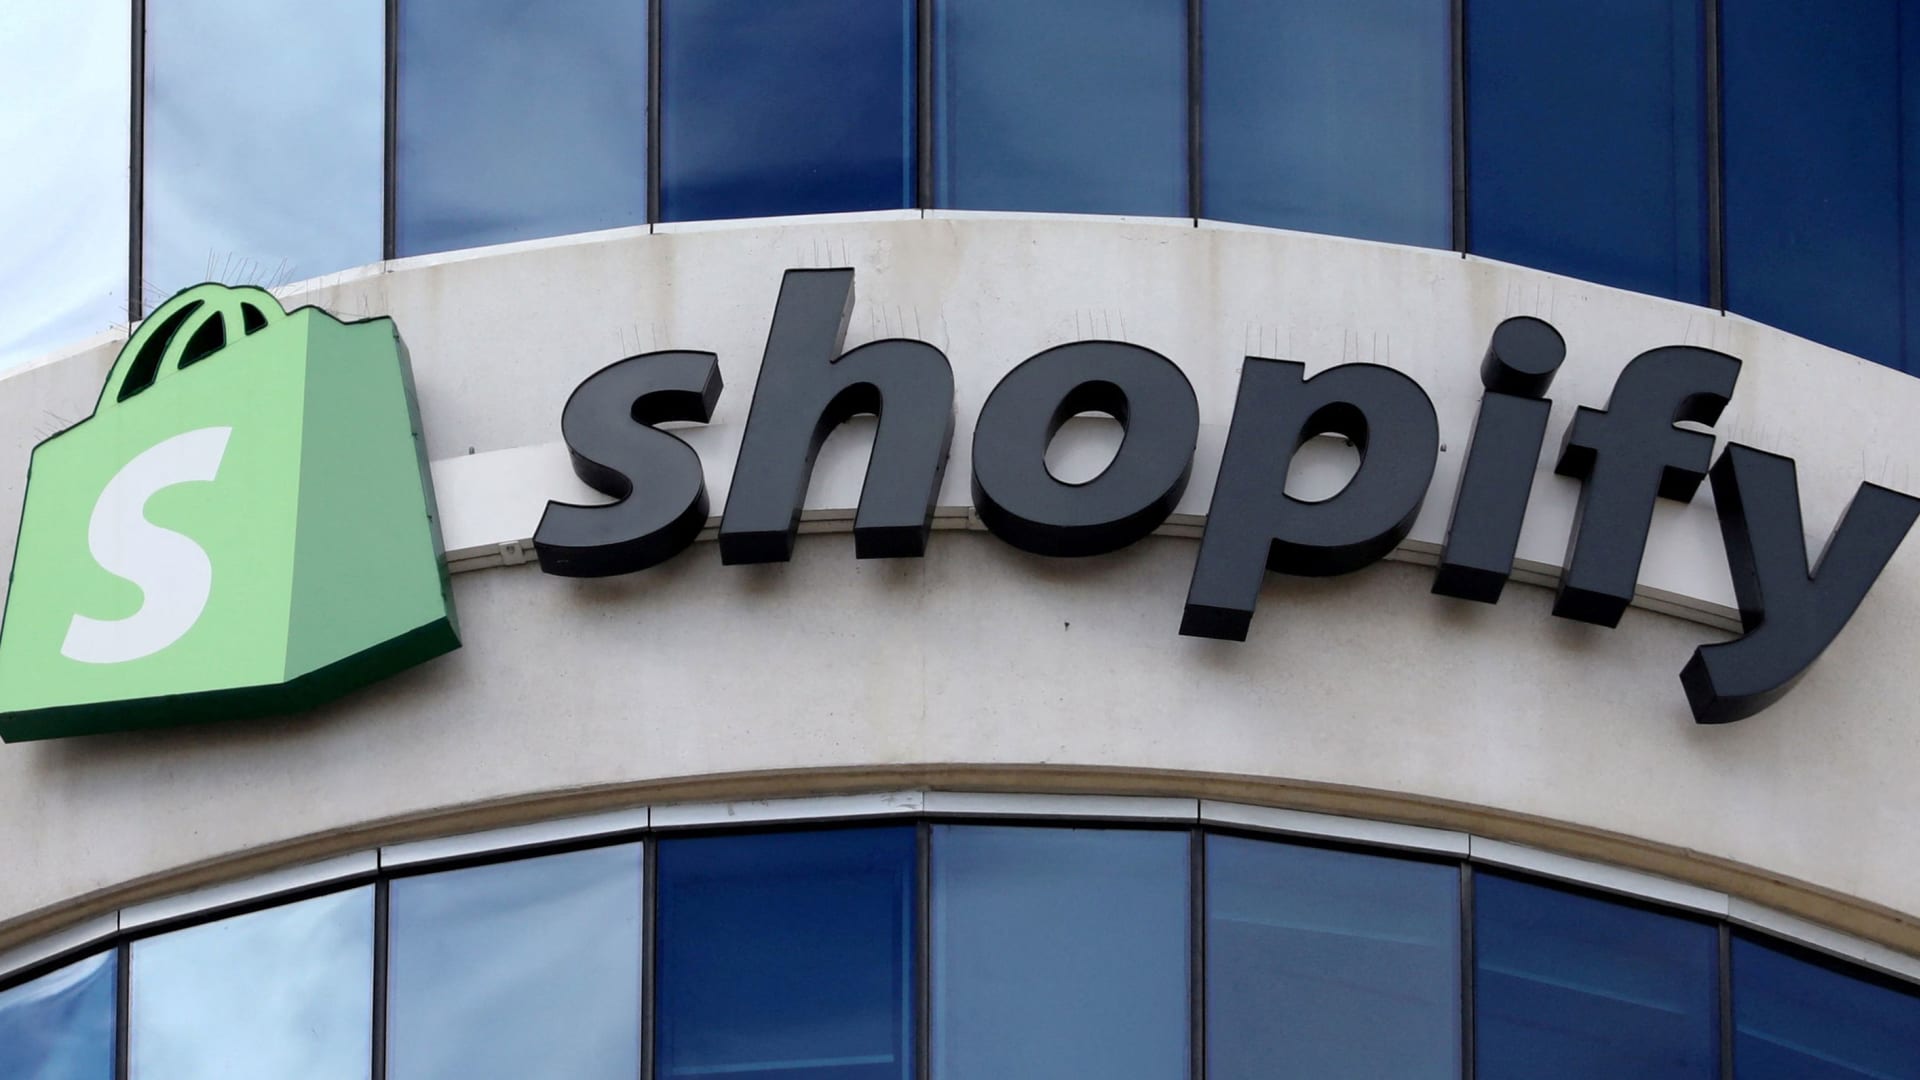 Buy Shopify on revived e-commerce spending, says Atlantic Equities